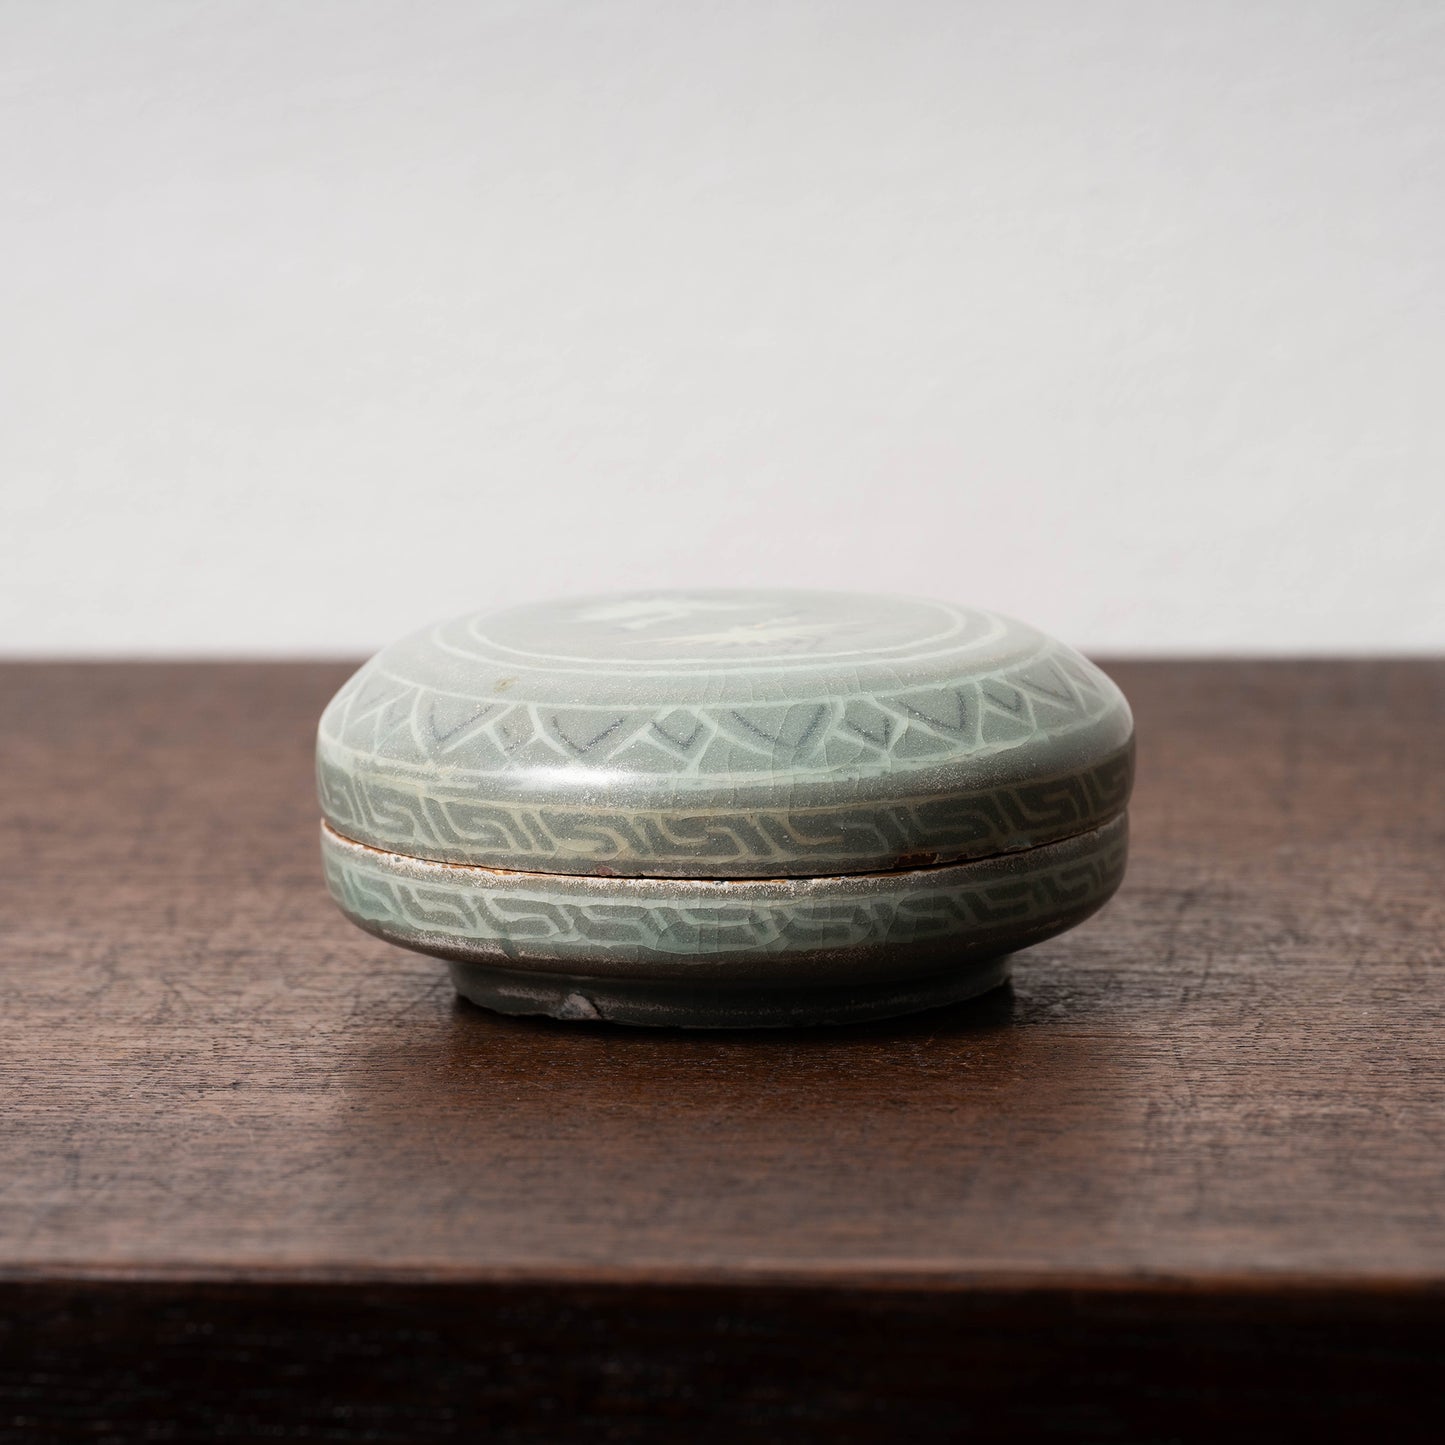 Goryeo Celadon Covered Box with Inlaid Crane Design